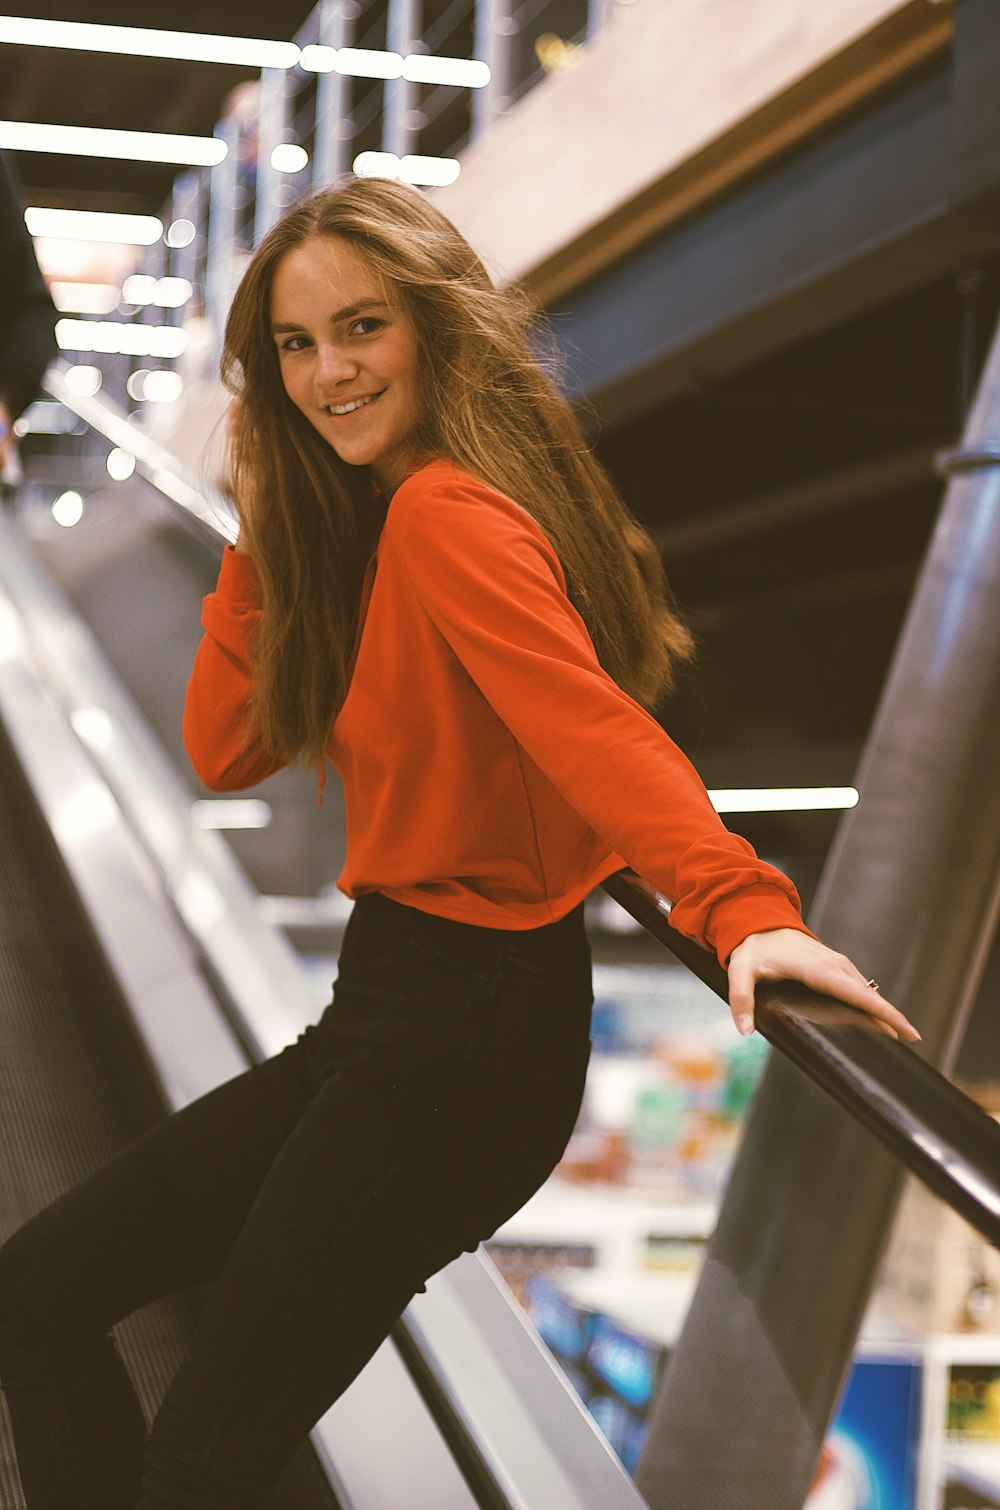 woman leaning on escalator railing while holding her hair